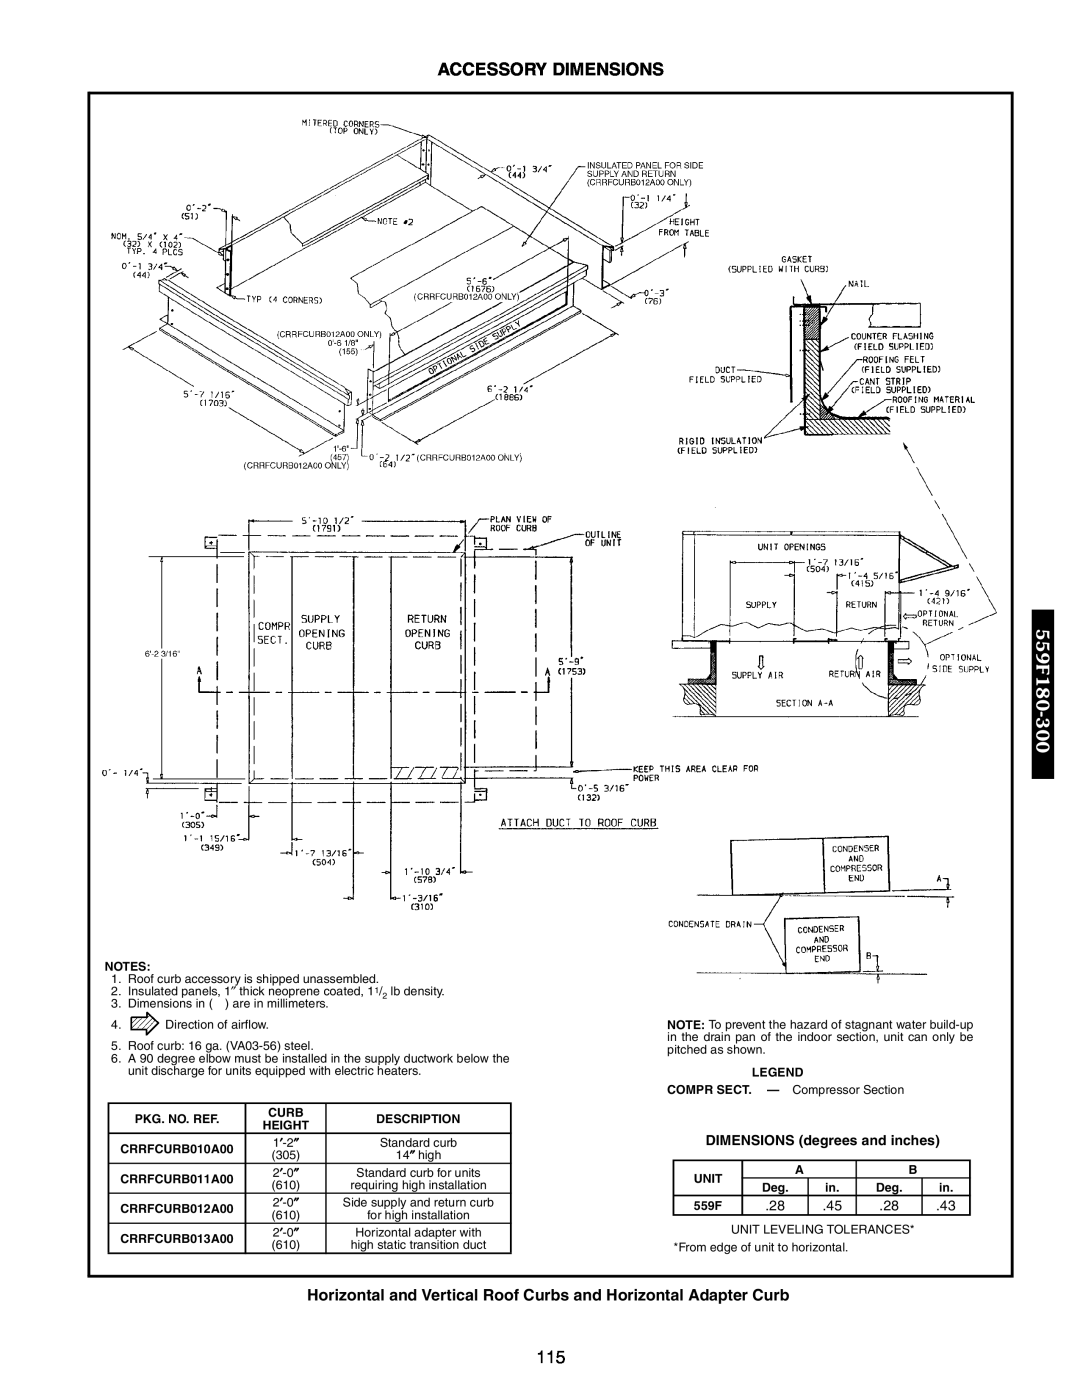 Bryant 551B, 558F, 551A Horizontal and Vertical Roof Curbs and Horizontal Adapter Curb, Accessory Dimensions, 559F180-300 